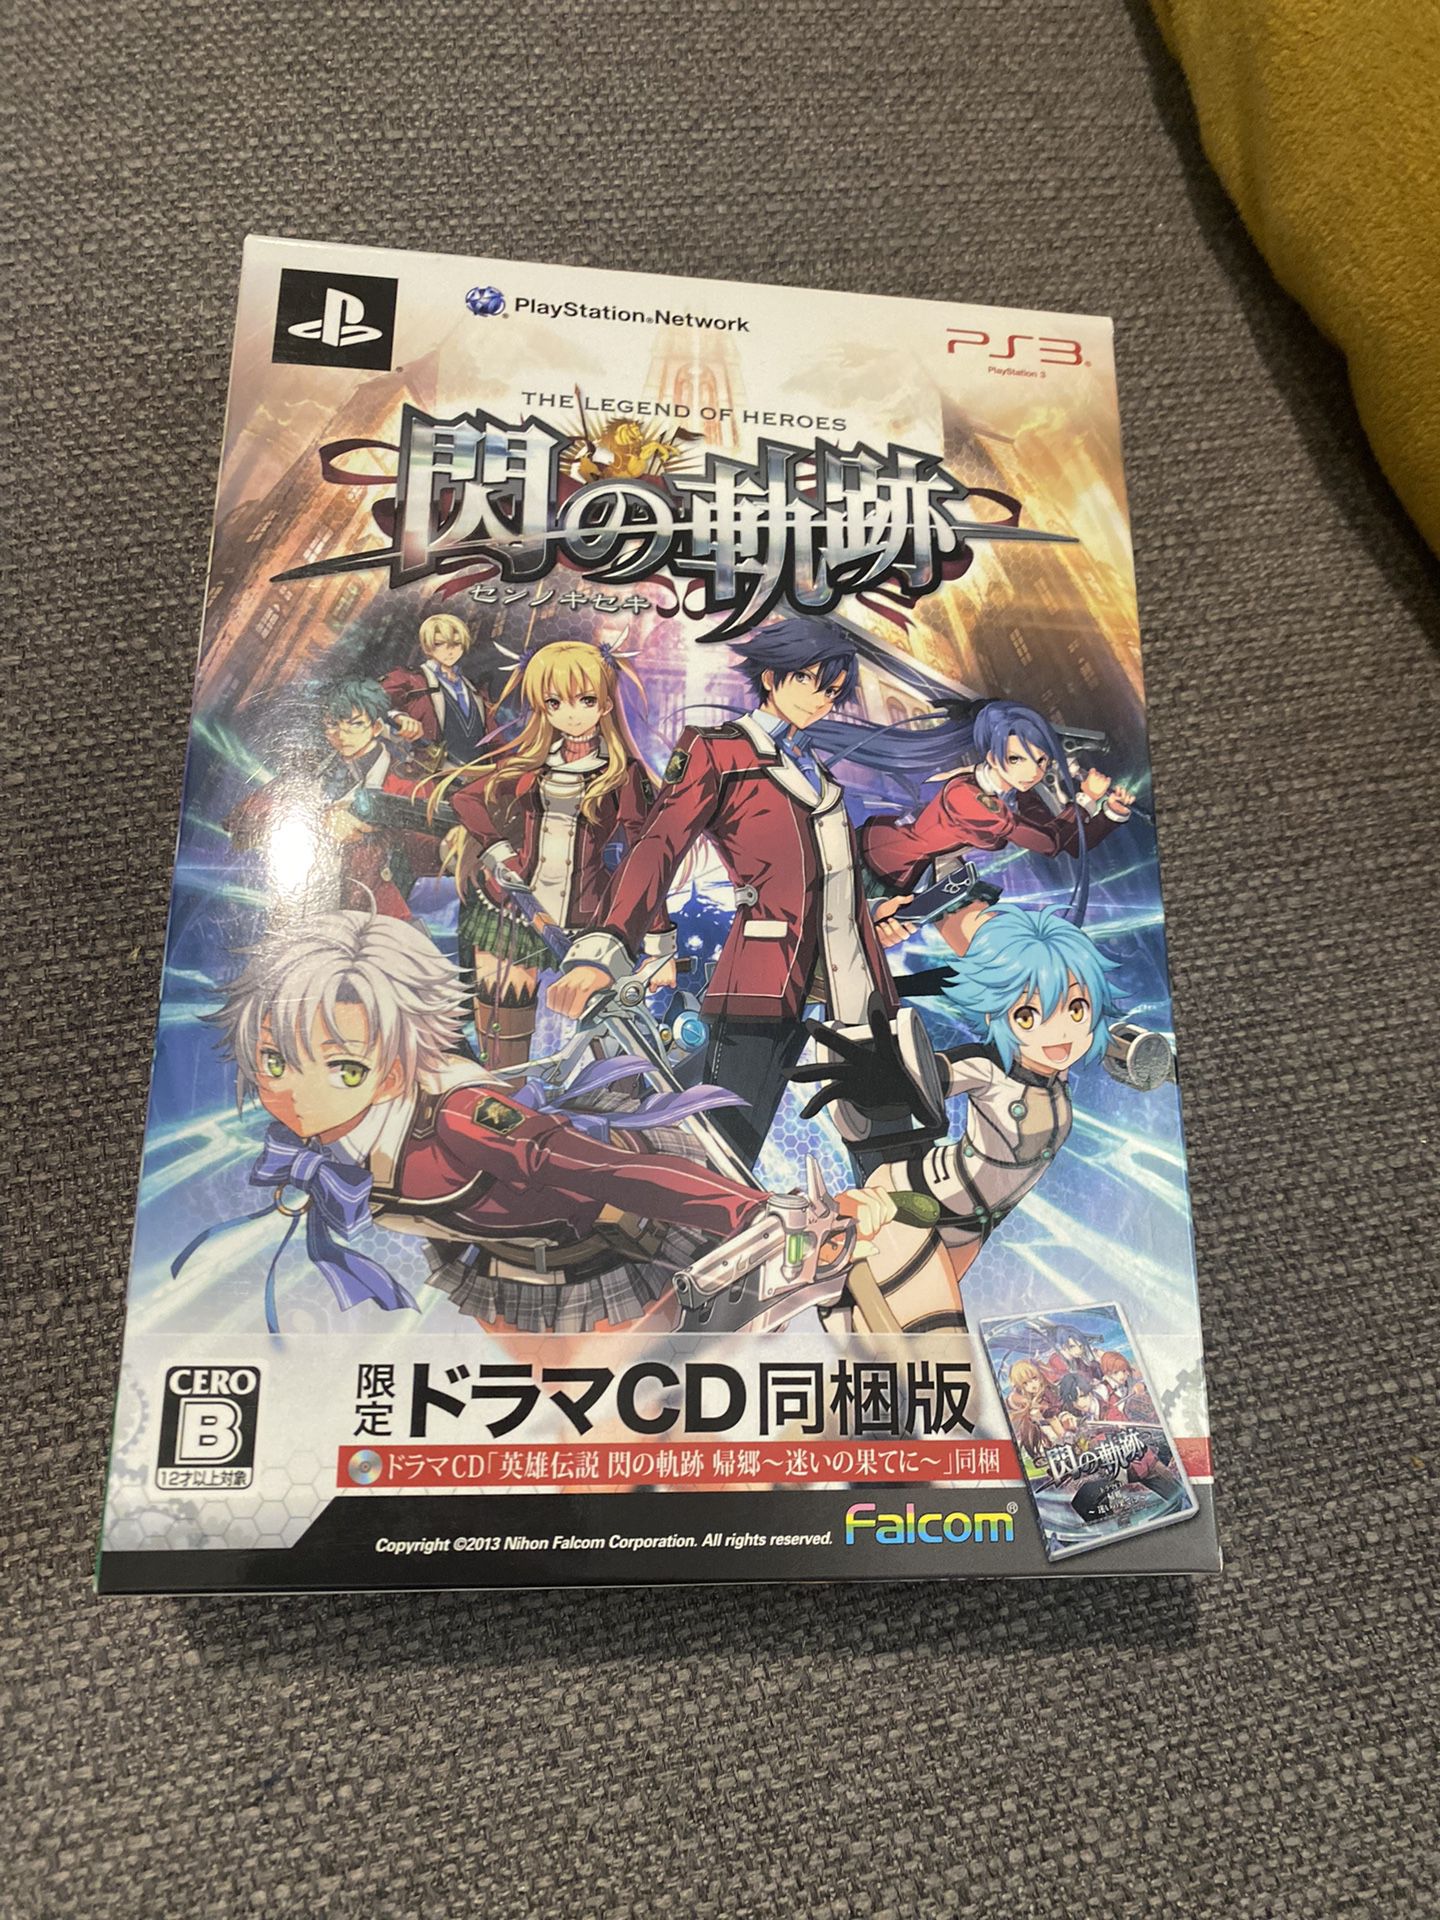 The Legend of Heroes Japanese Ps3 Game